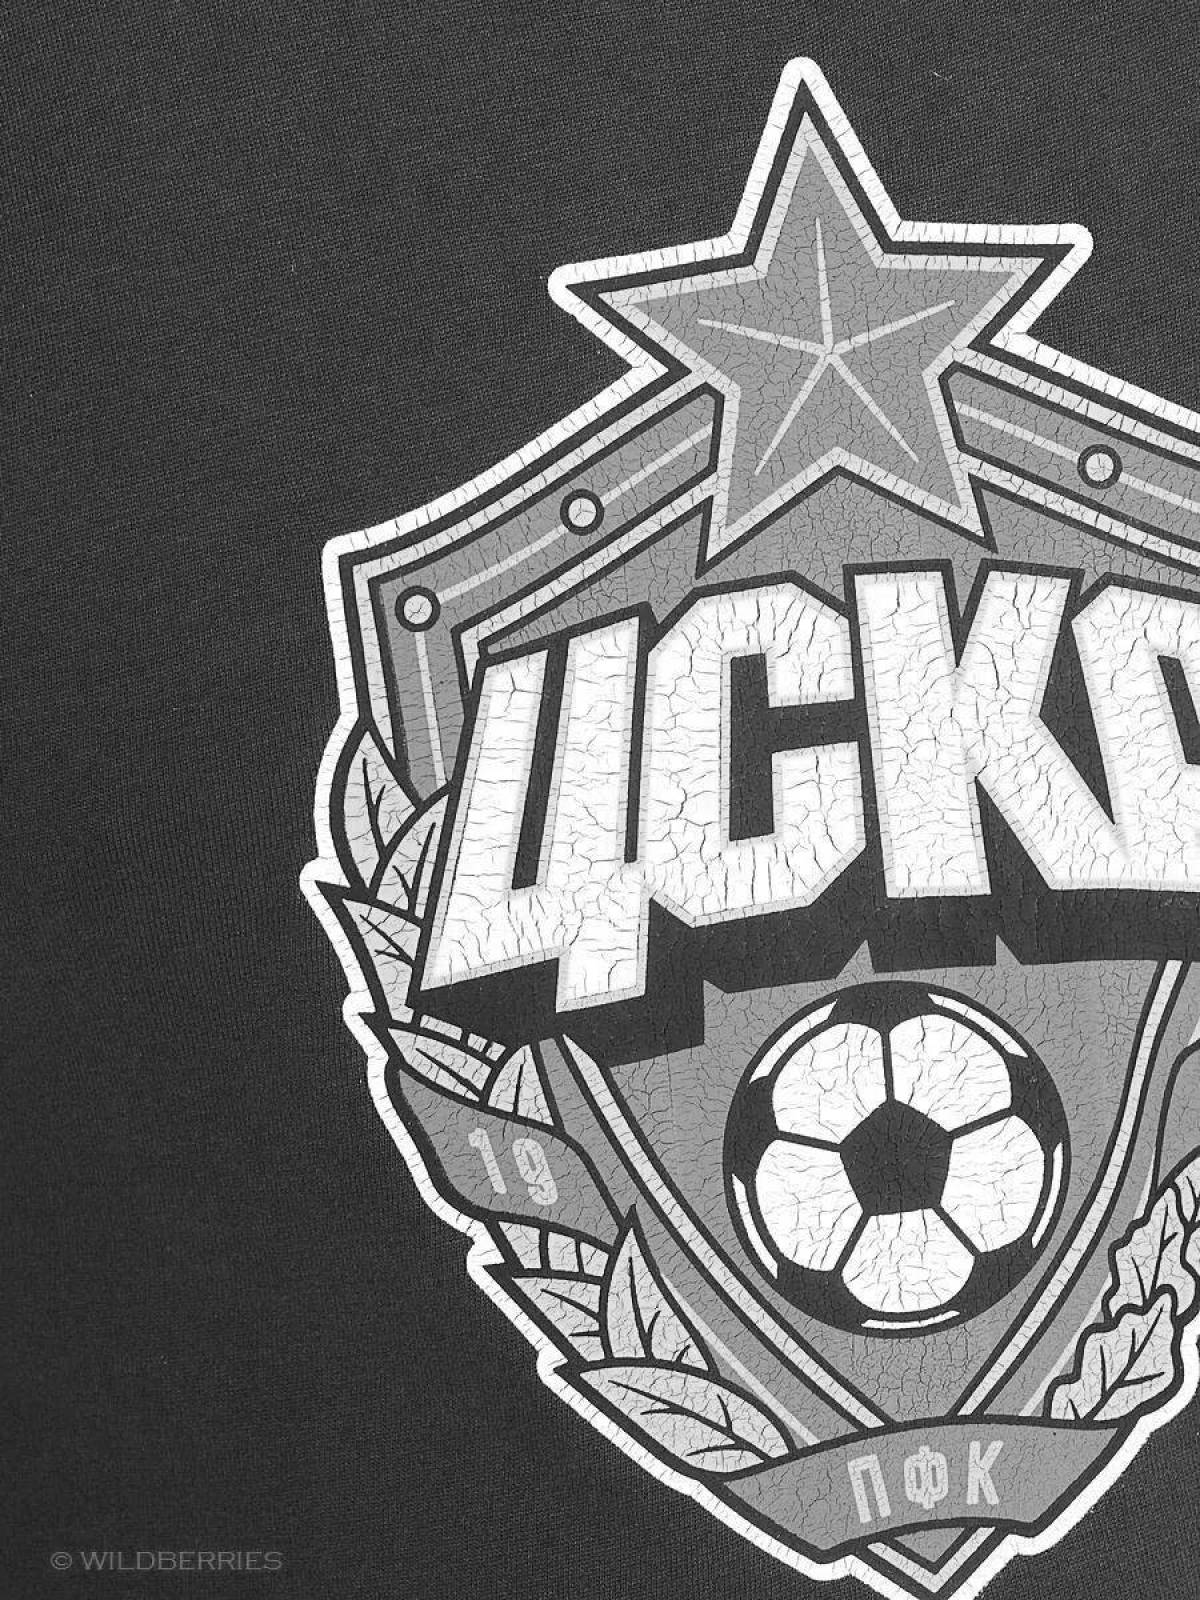 Exciting coloring of the CSKA emblem